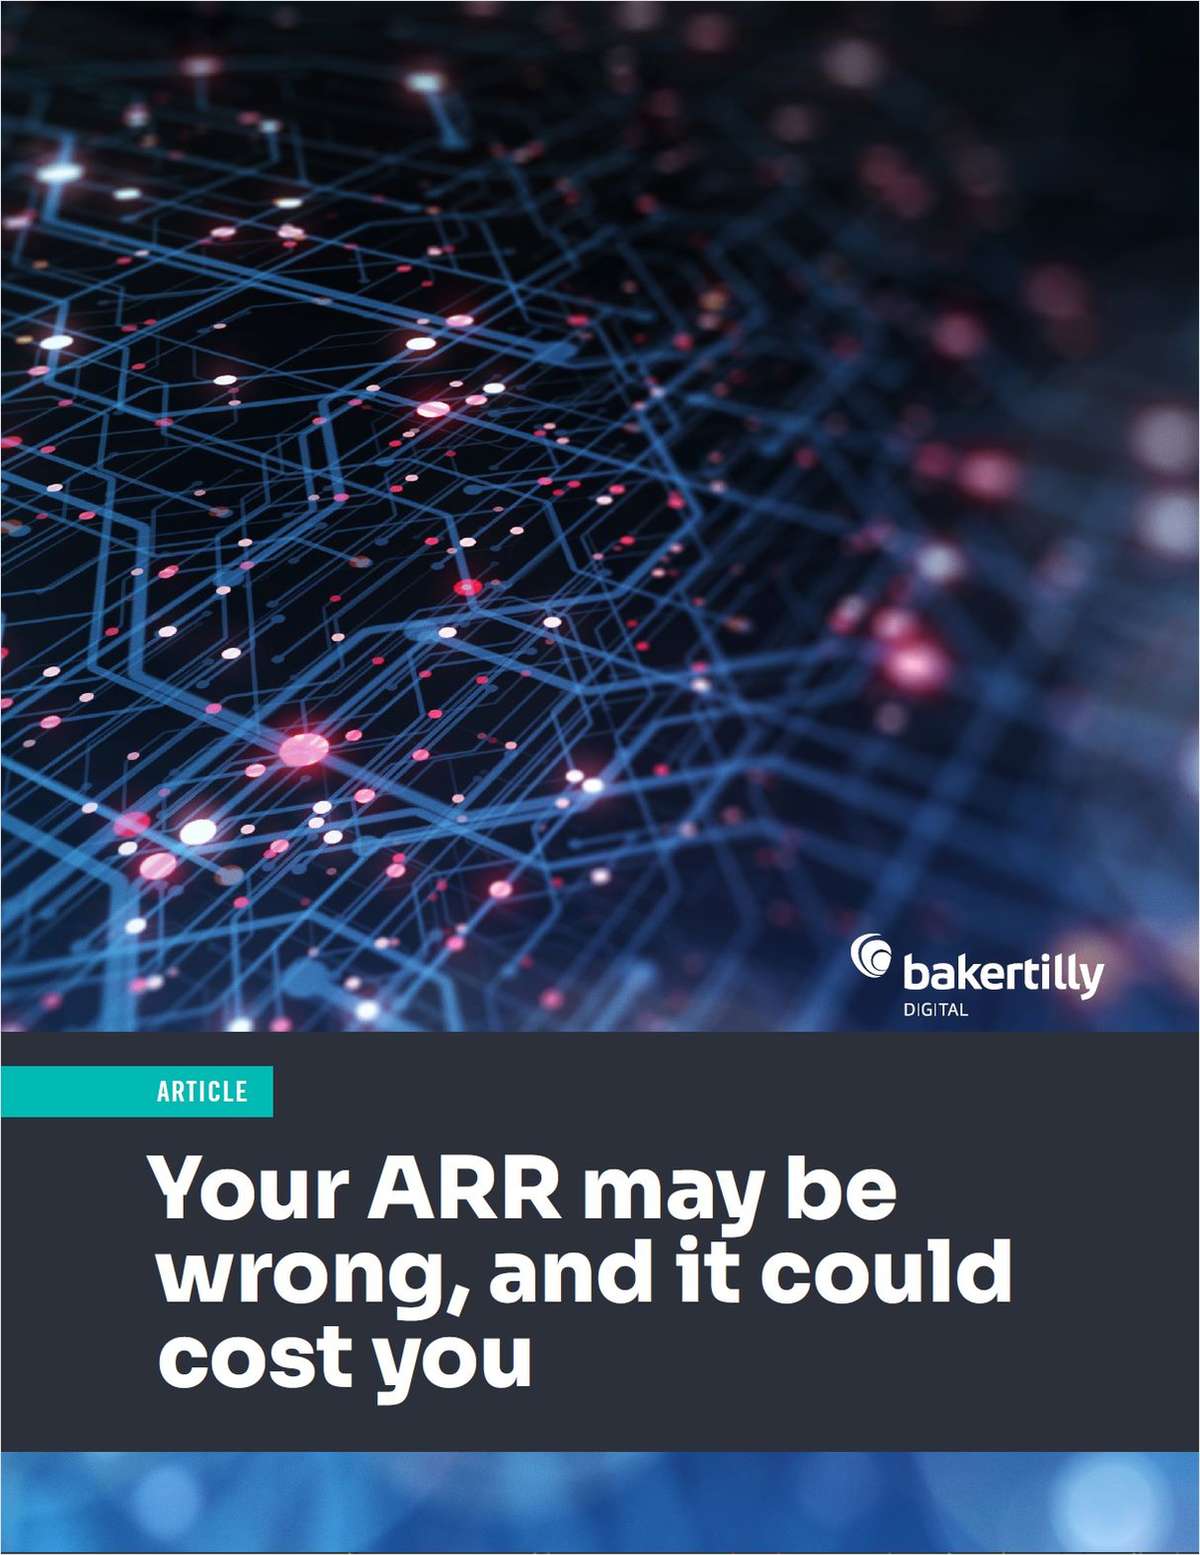 Your ARR may be wrong, and it could cost you